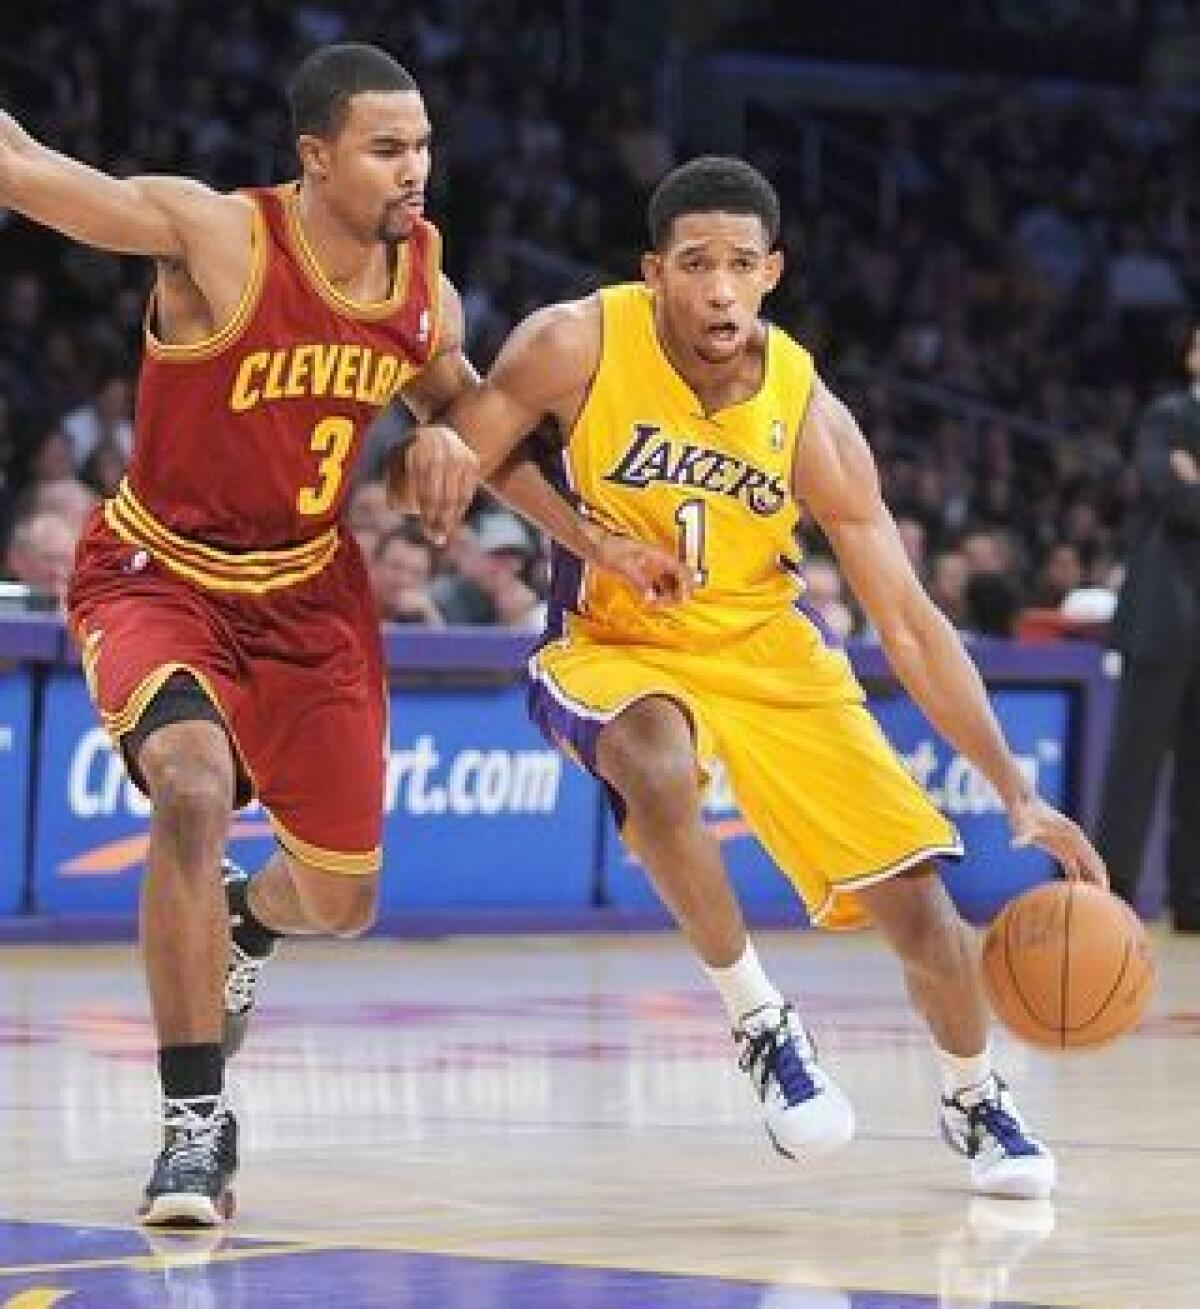 Lakers guard Darius Morris was assigned to the Development League